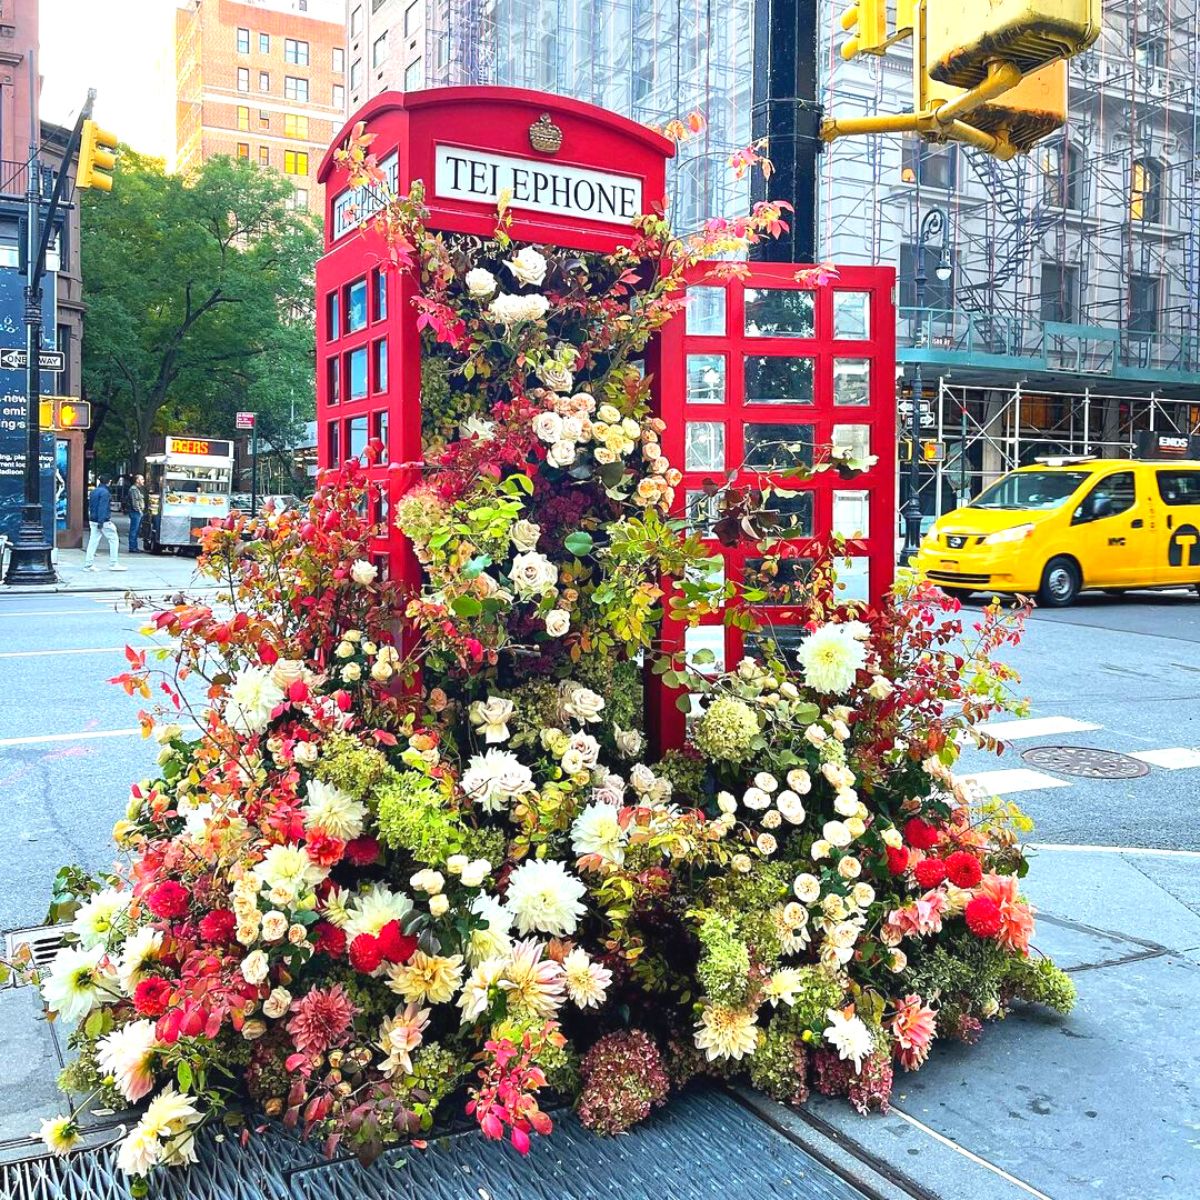 Flower display on a telephone booth